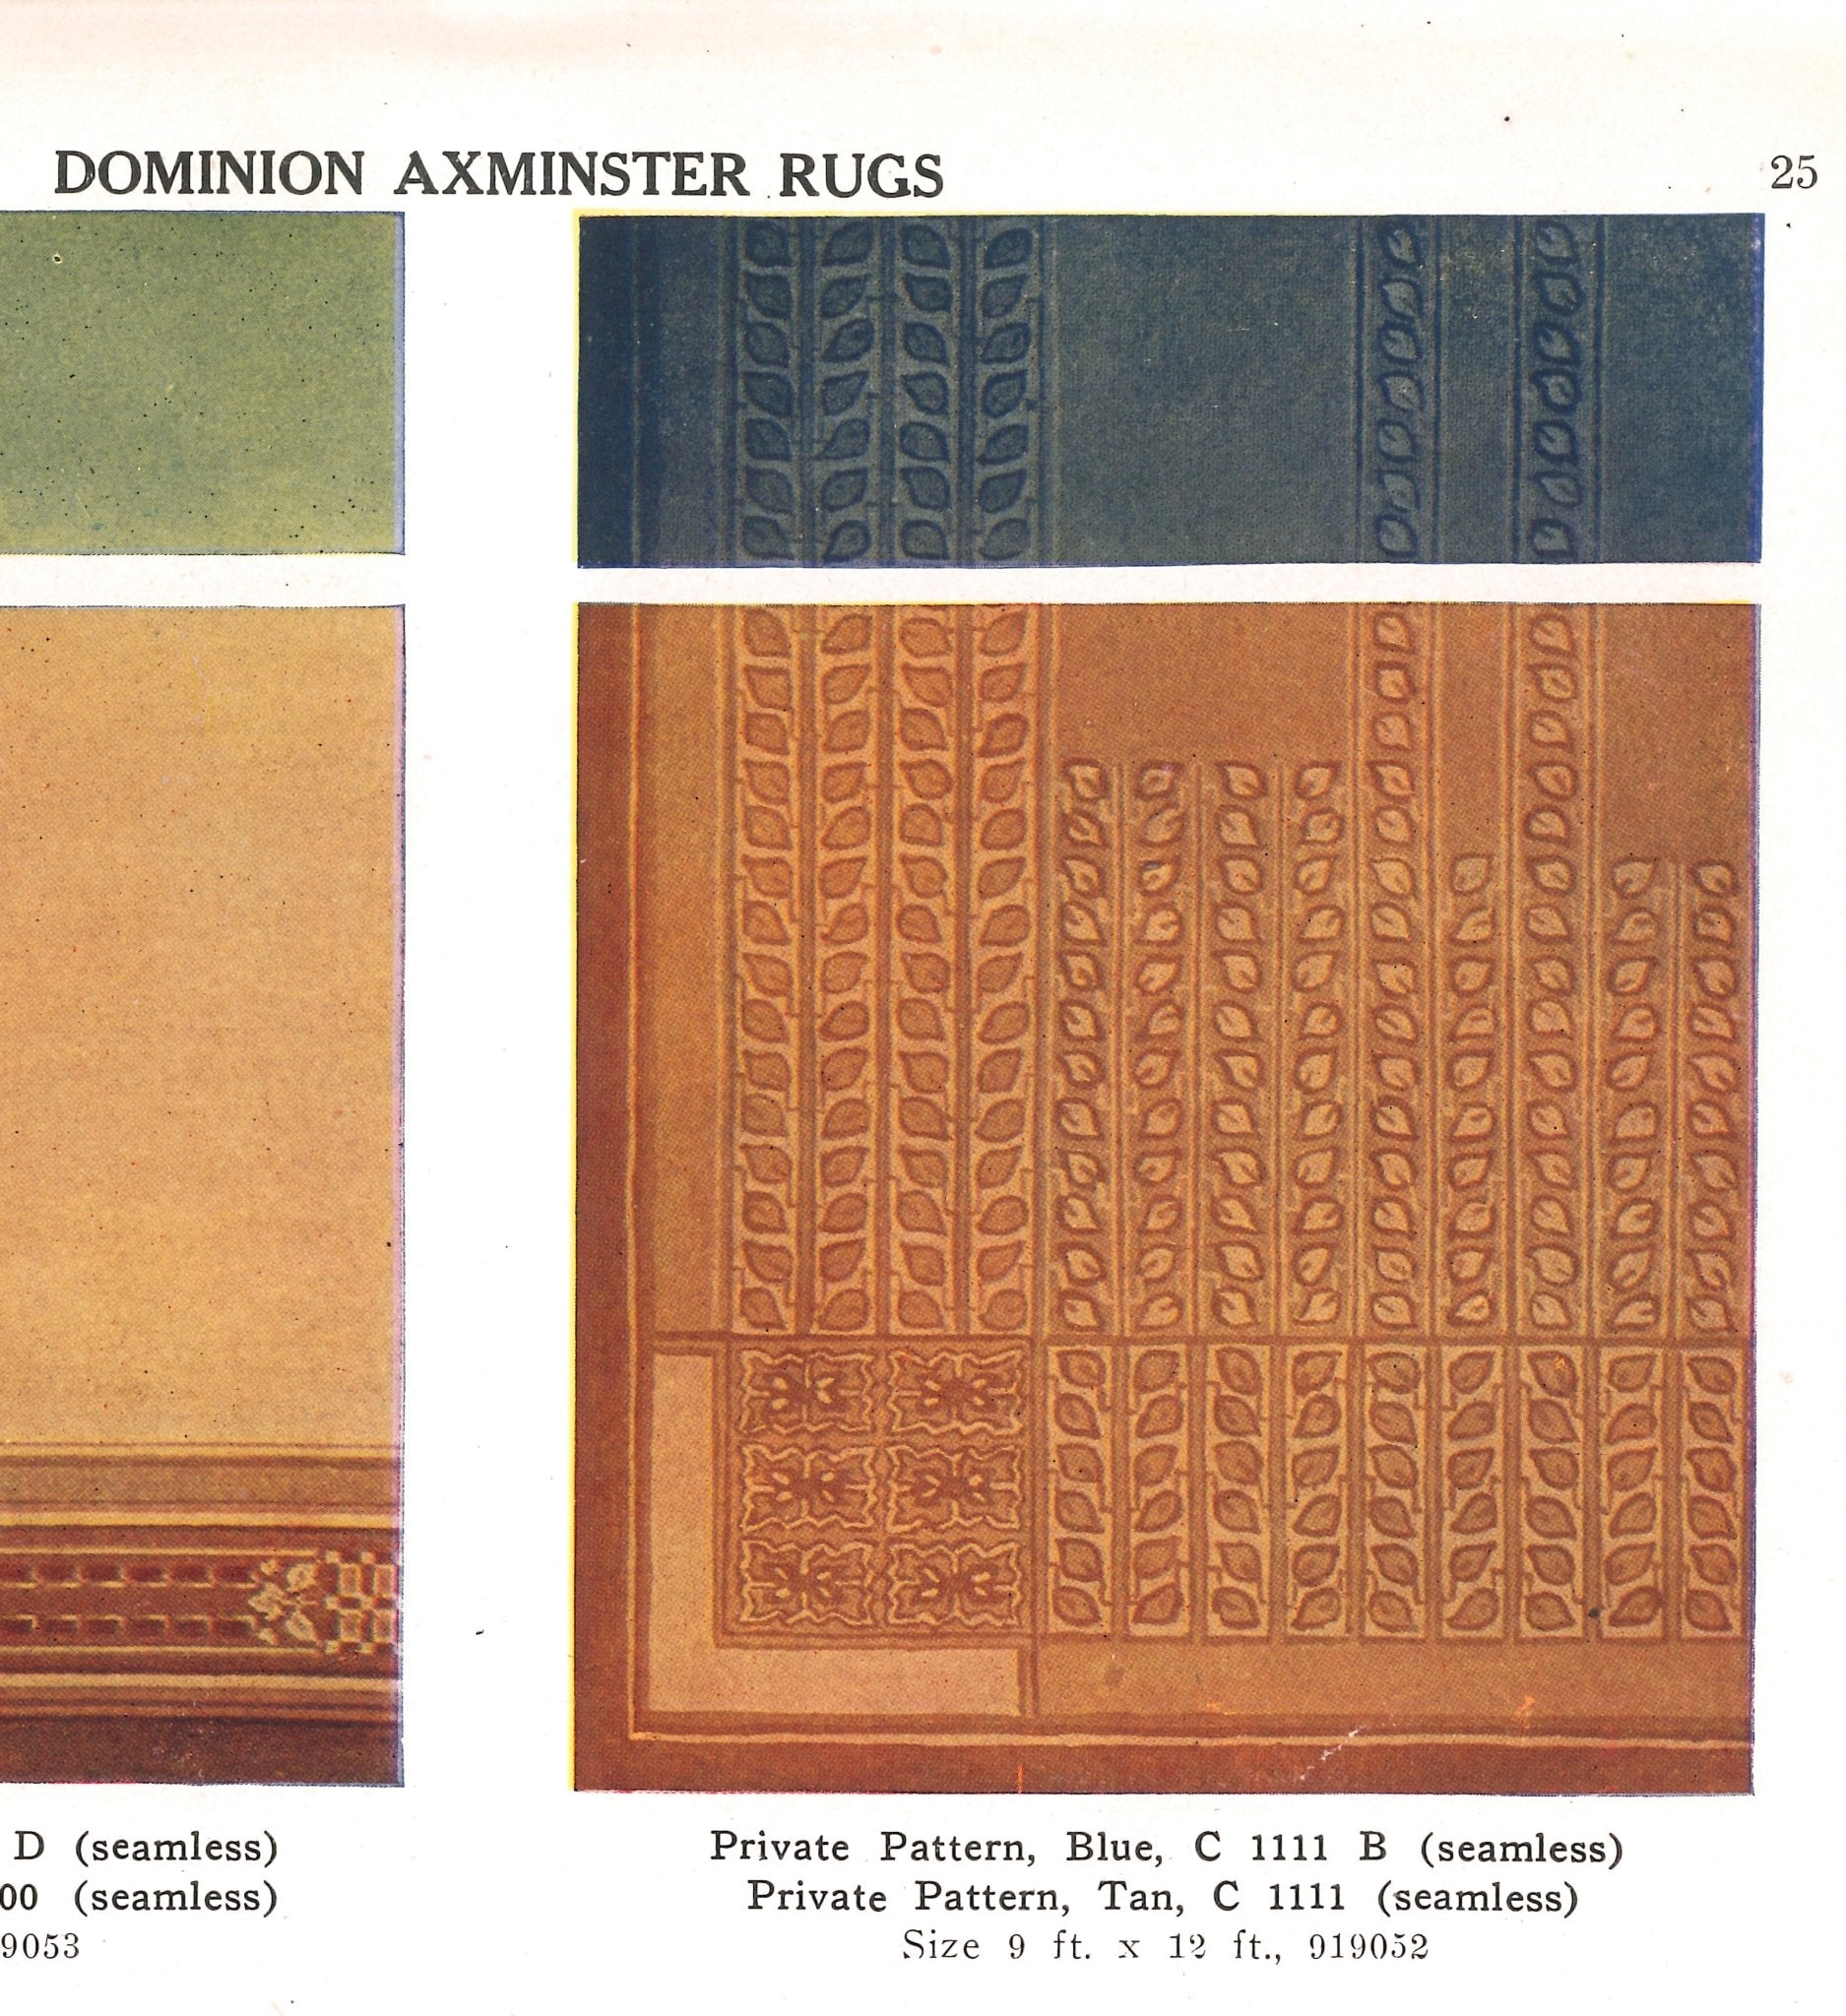 The source image for the Autumn Leaves Floorcloth Series from a 1915 rug catalog.